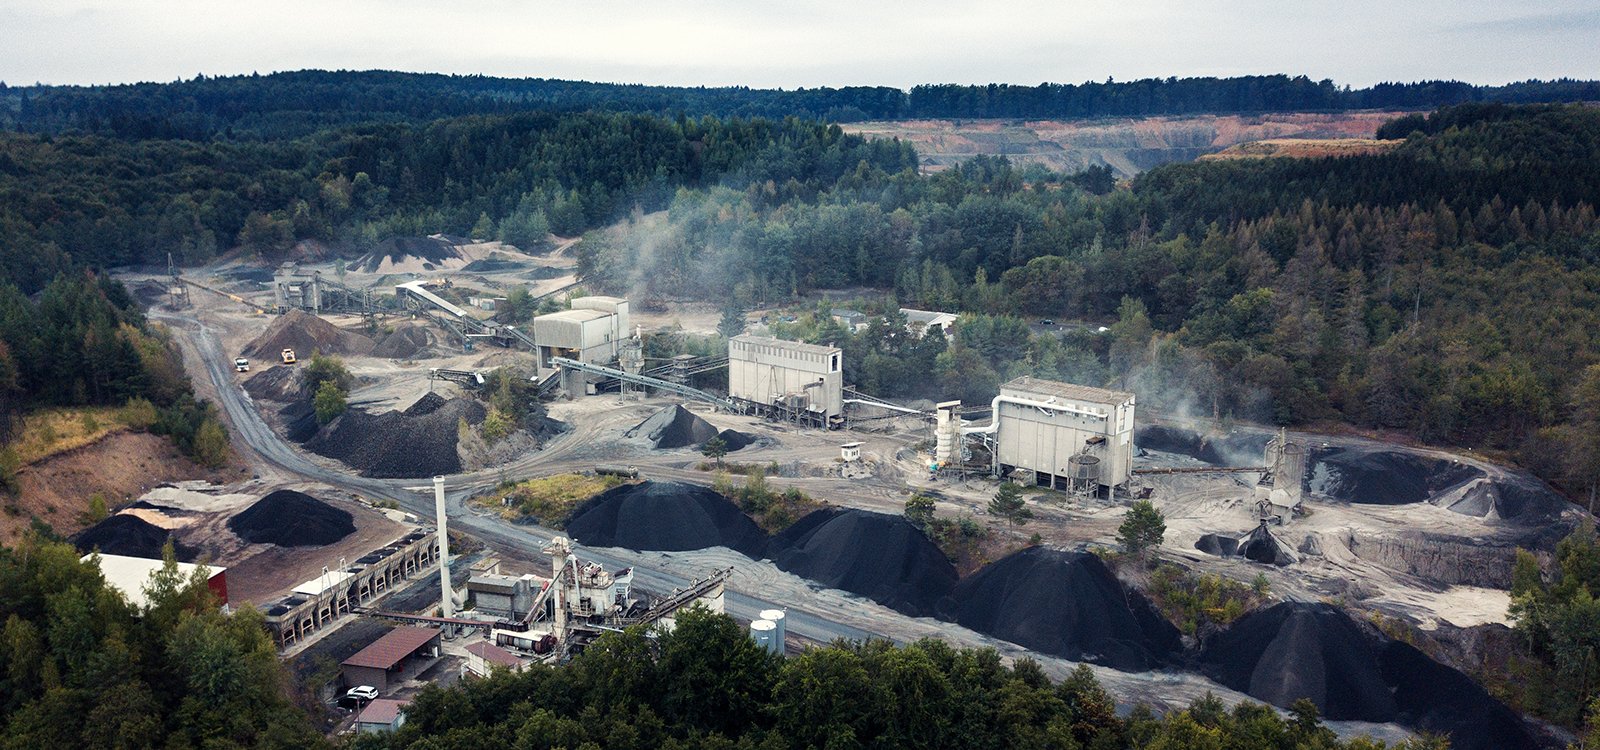 <p>Vogelsberger Basaltwerk in south-western Germany produces gravel, stone, sand and other raw materials primarily used as aggregate for asphalt and concrete.</p>